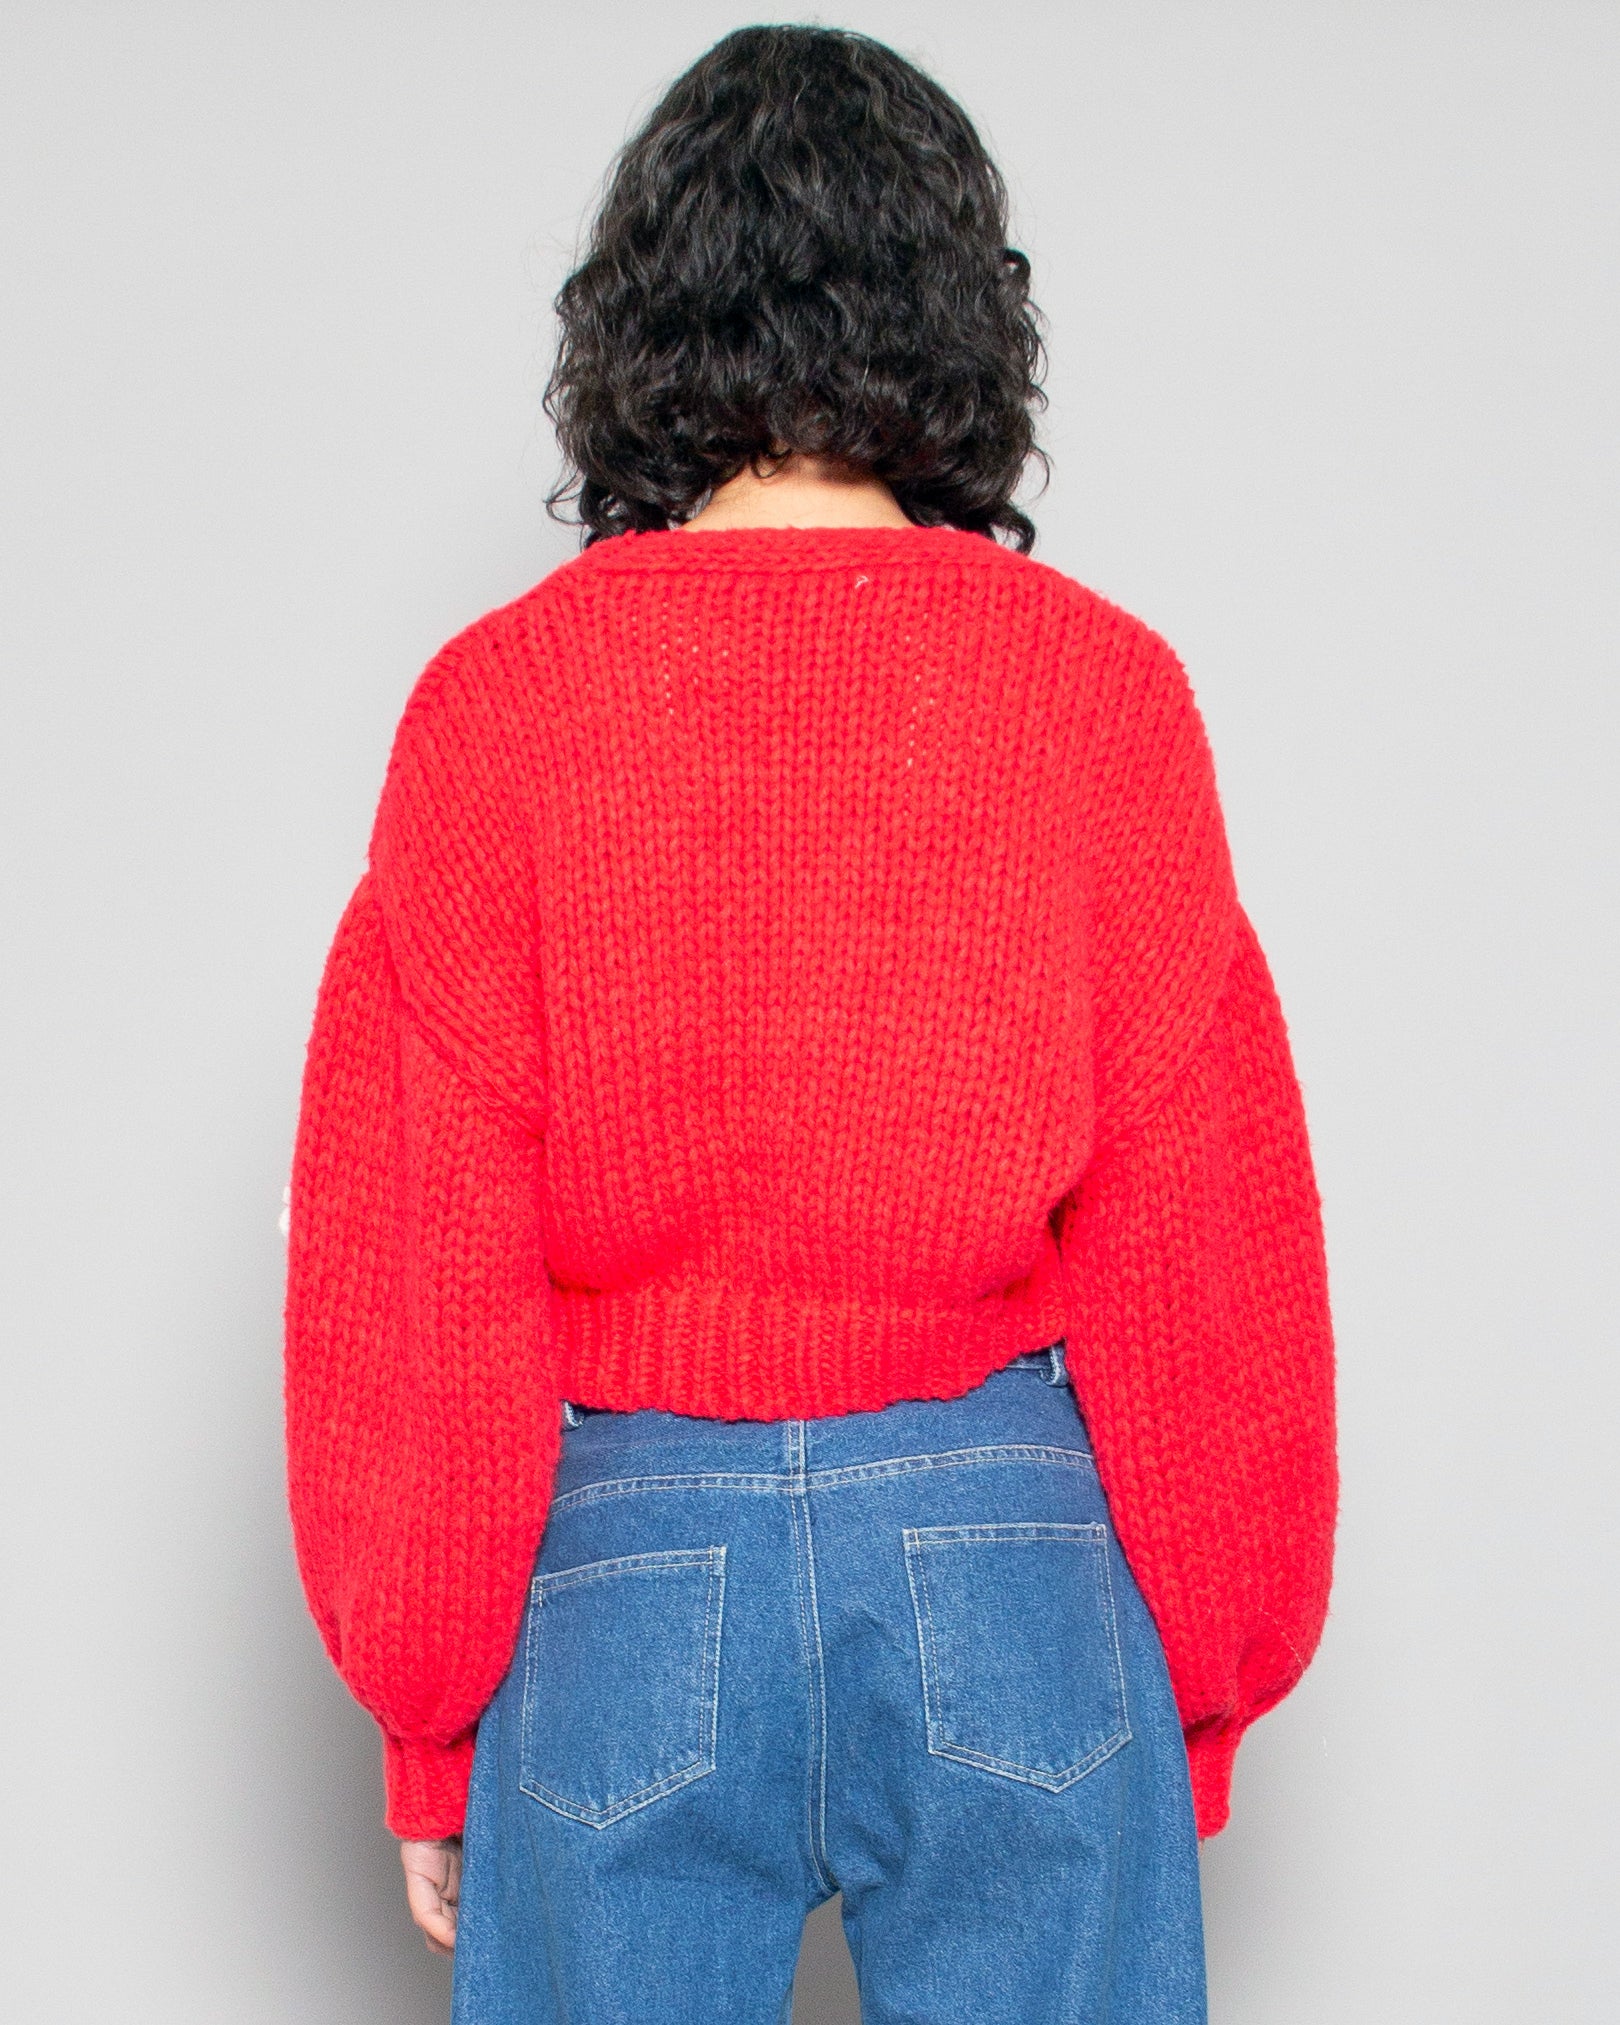 PERSONS Rose Chunky Knit Cardi in Red available at Lahn.shop